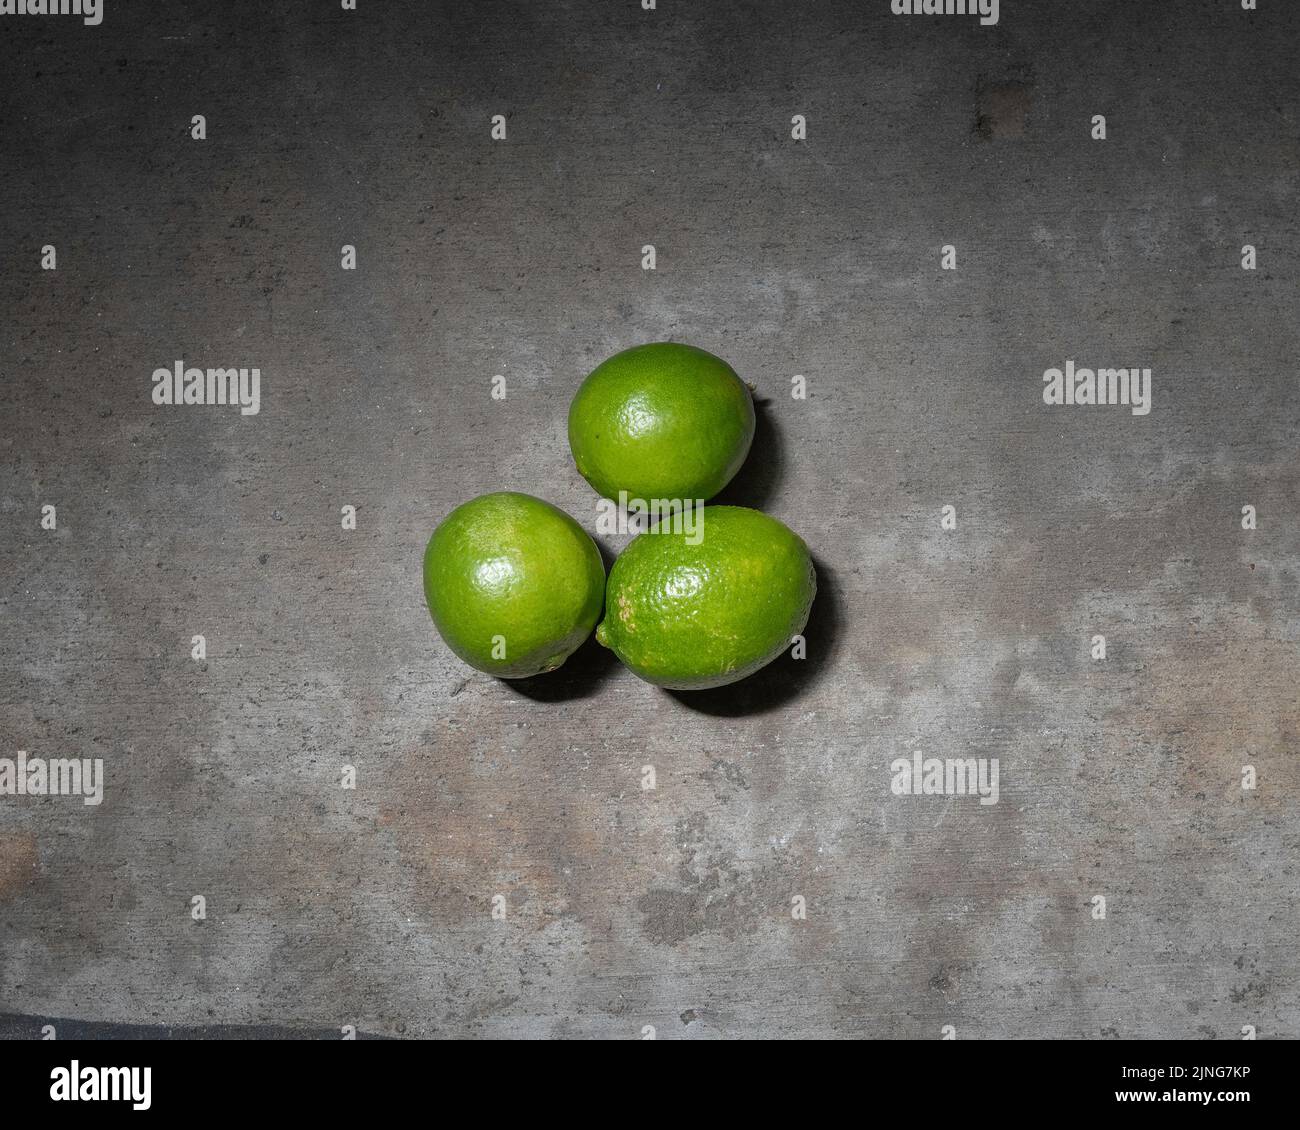 Close up of three bright green limes against a concrete background. Stock Photo